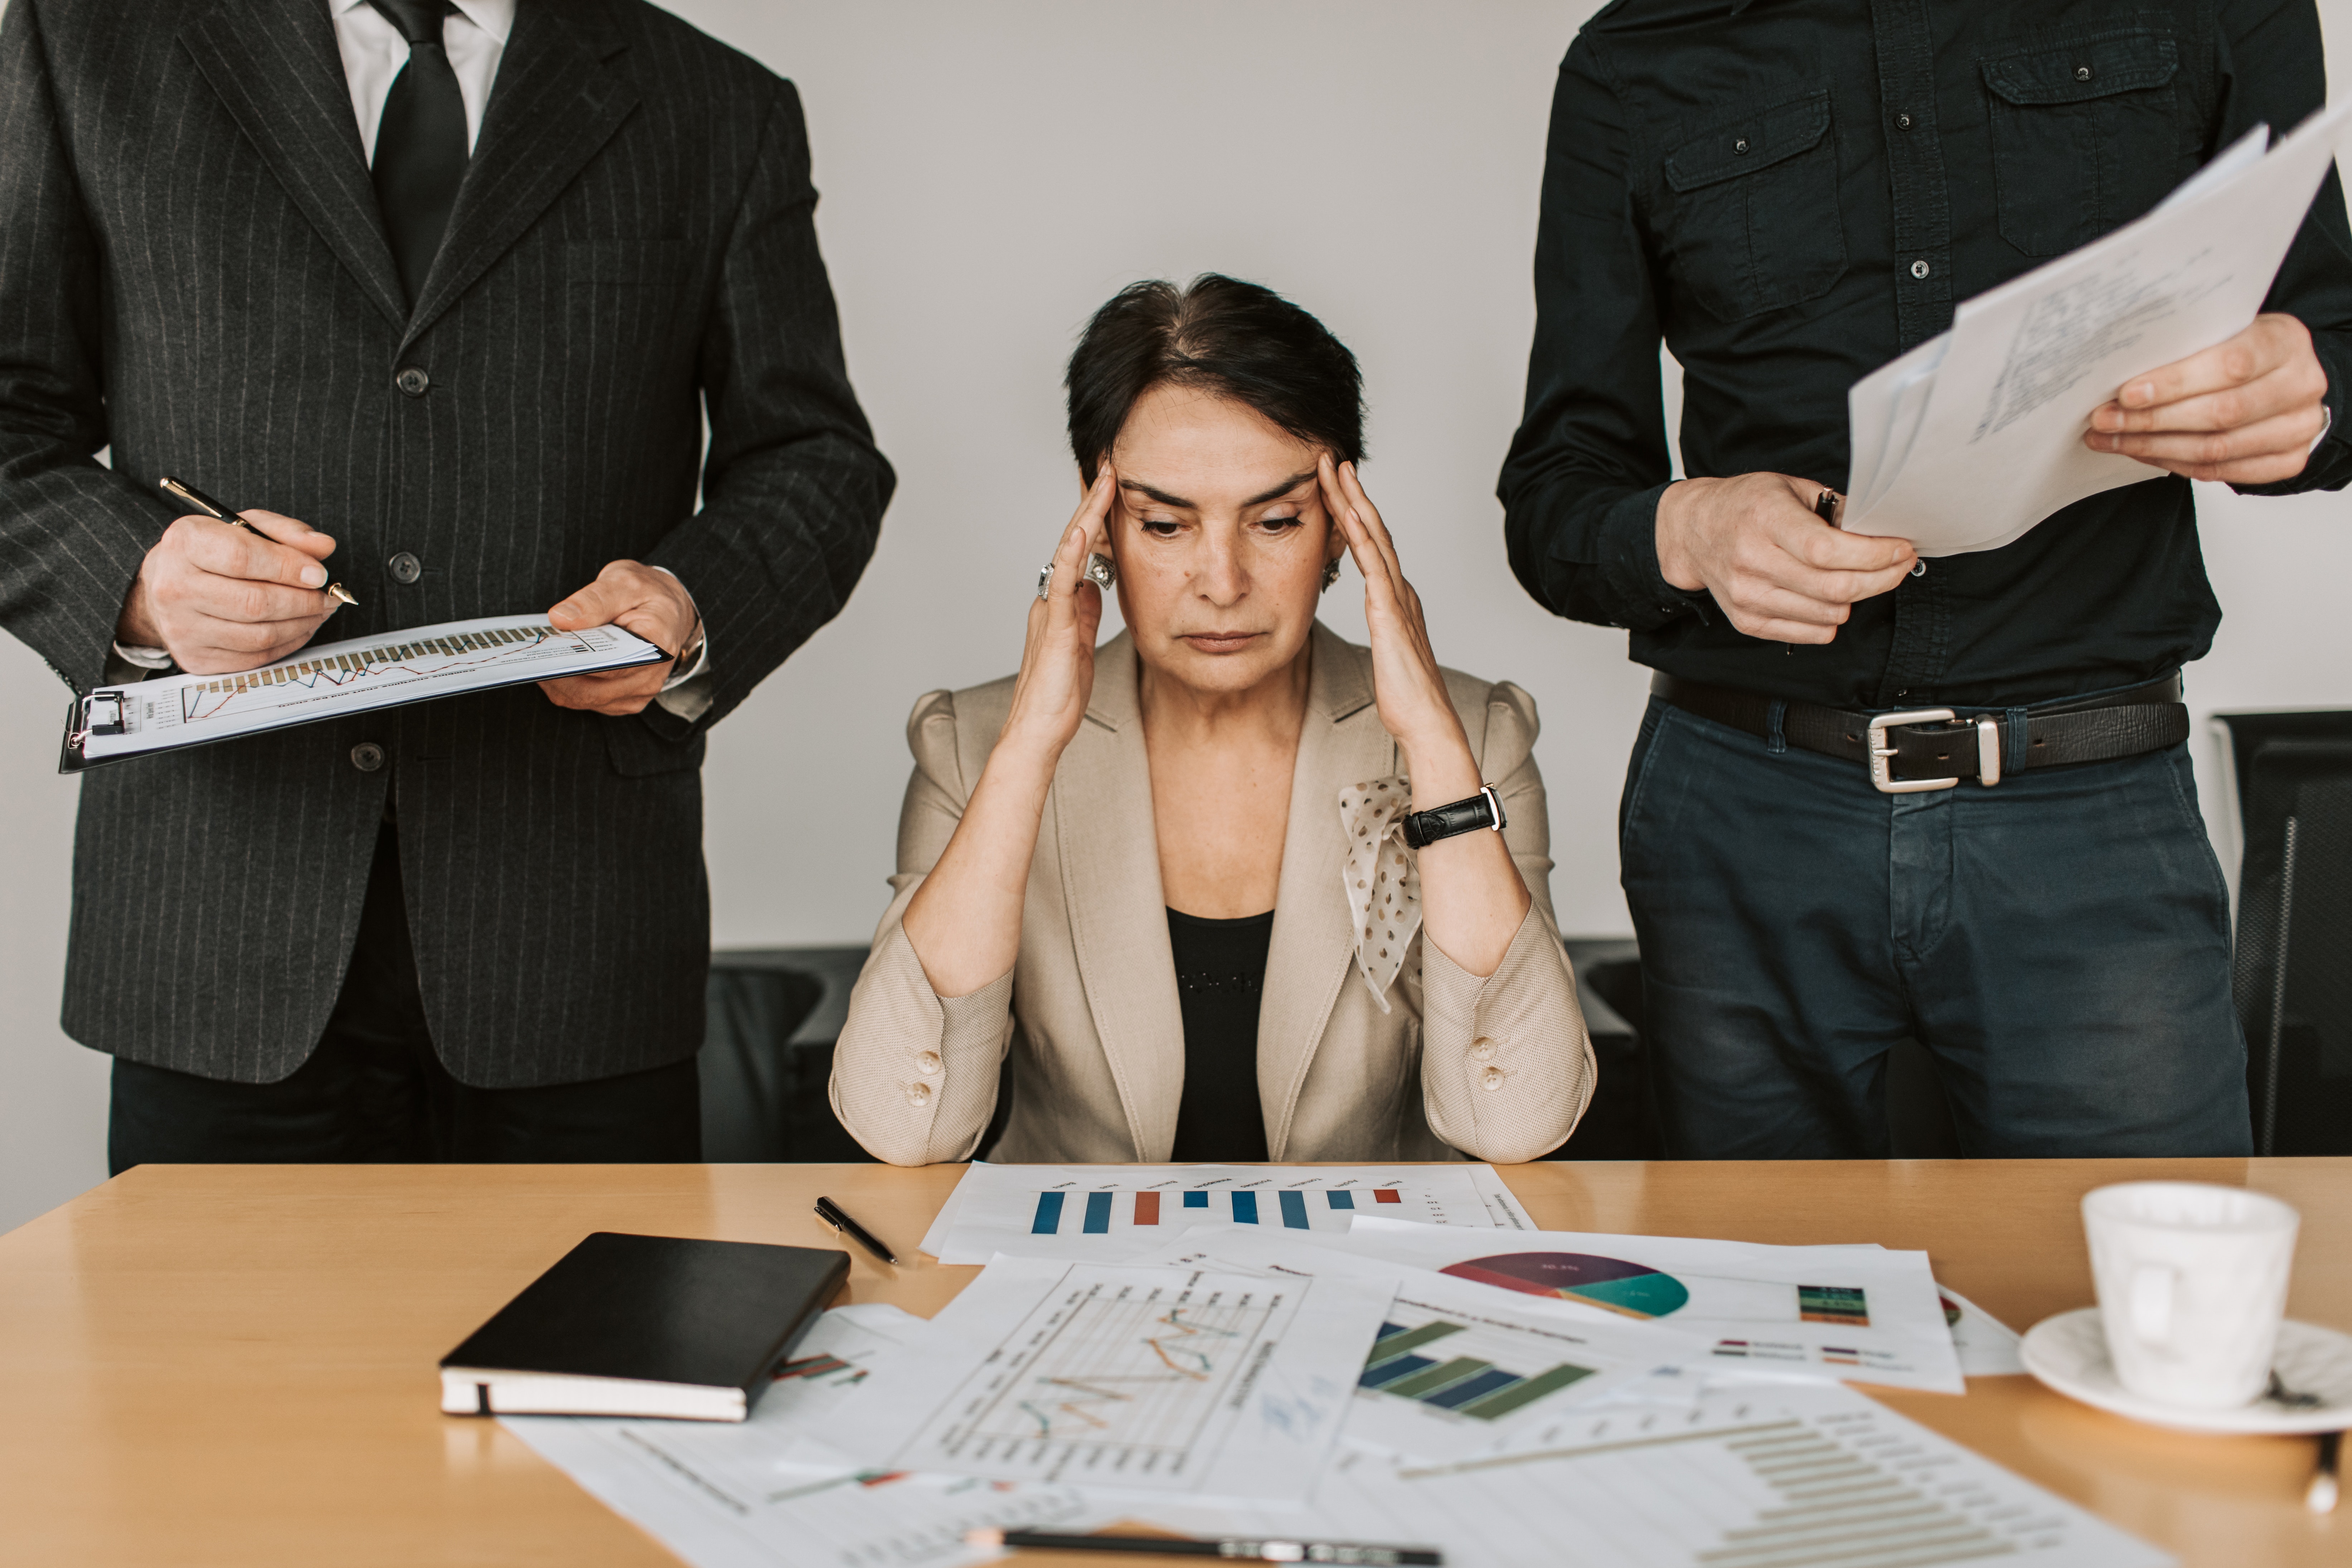 Corporate woman between two men expressing frustration amongst paperwork